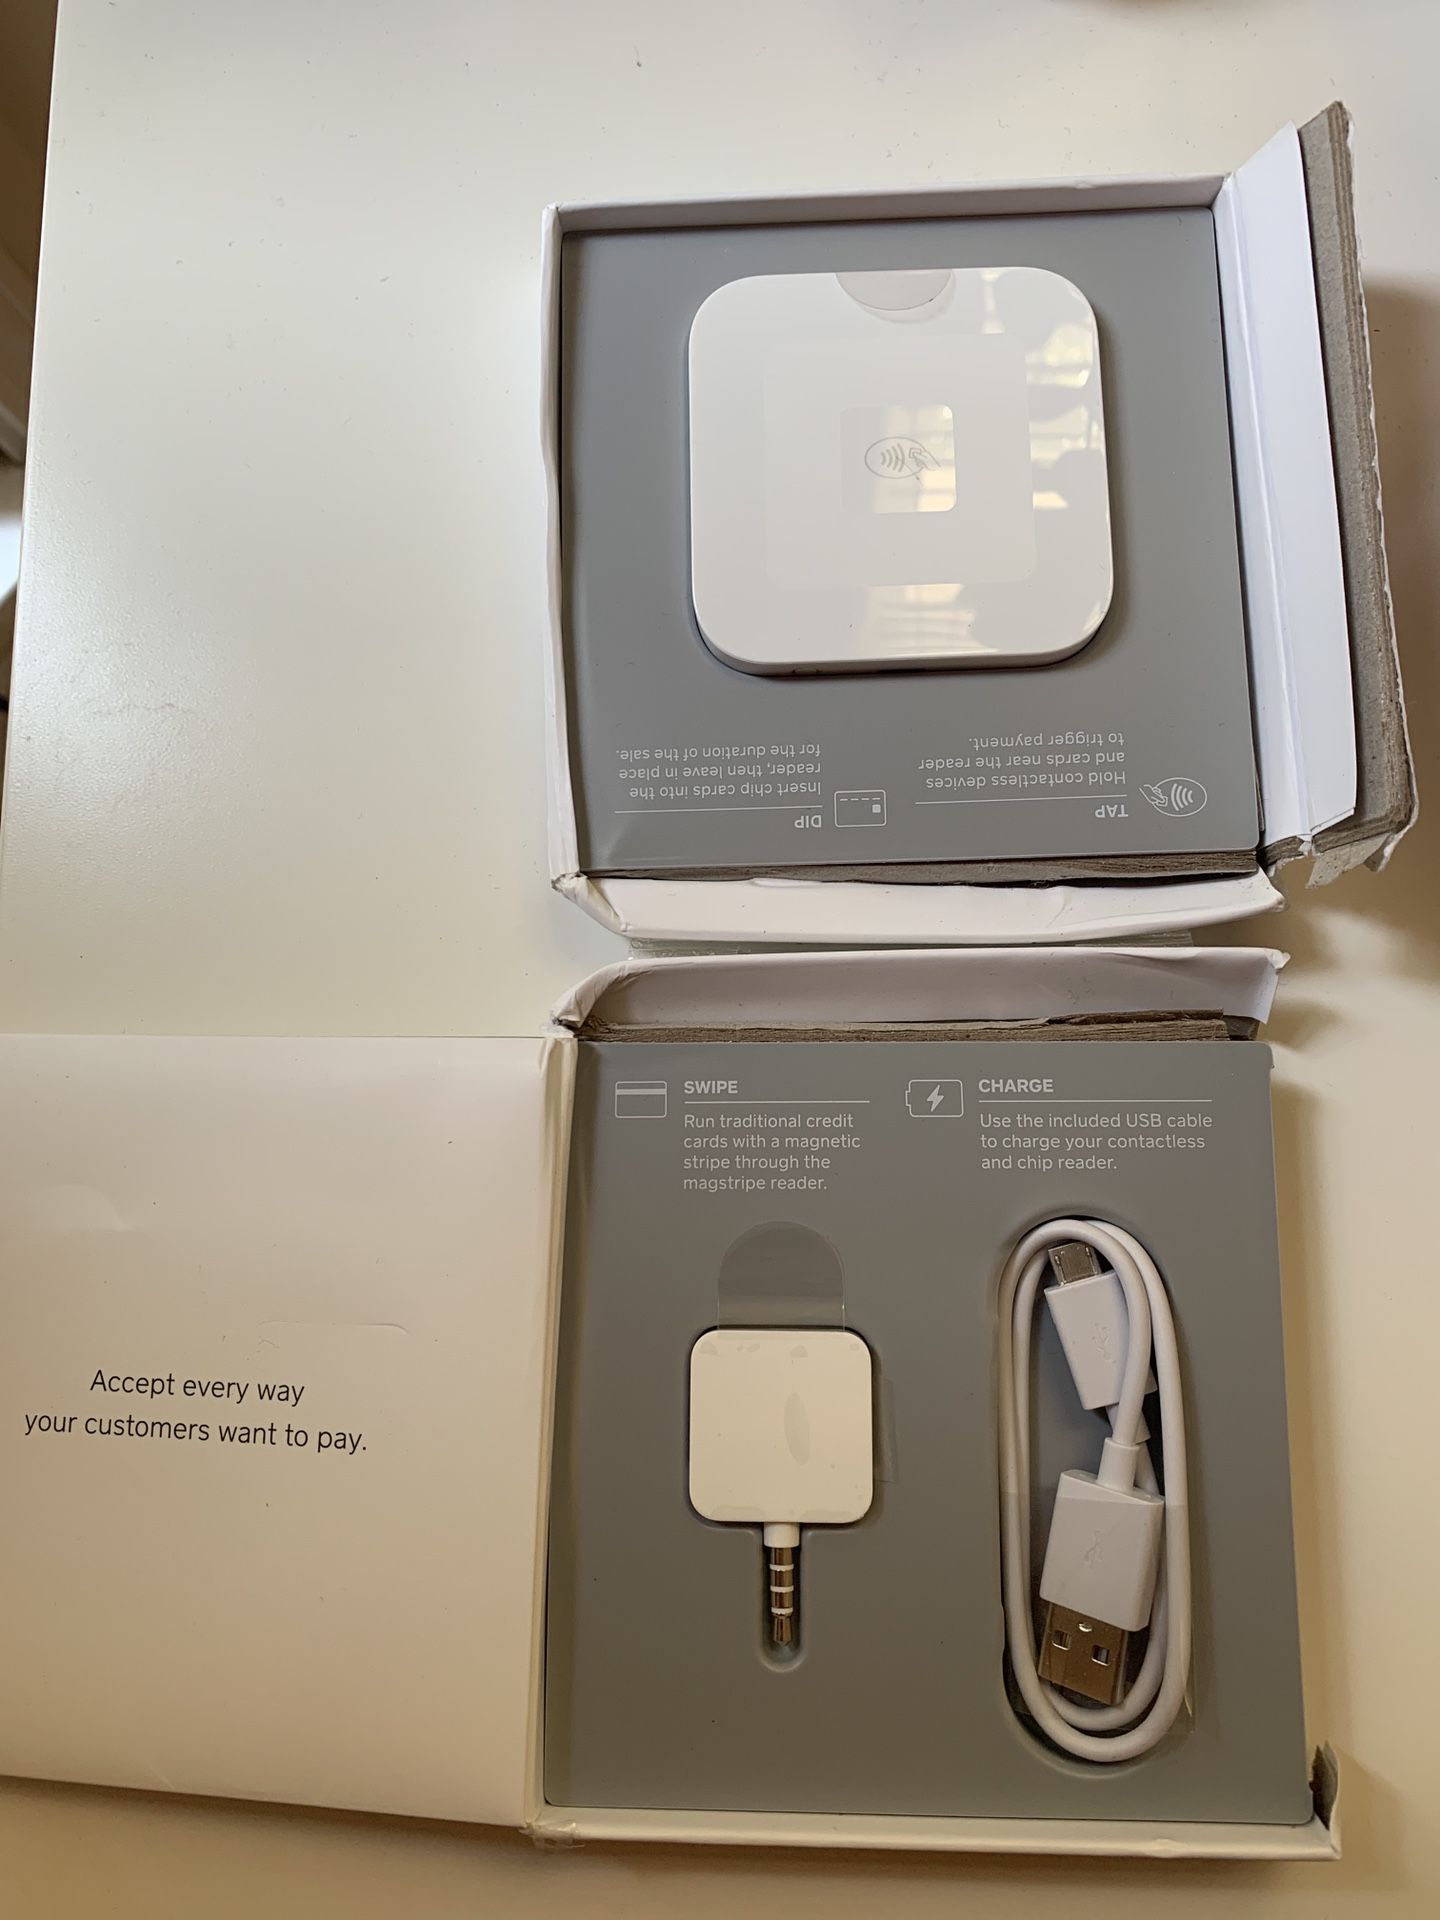 Square contactless chip reader plus magstripe kit